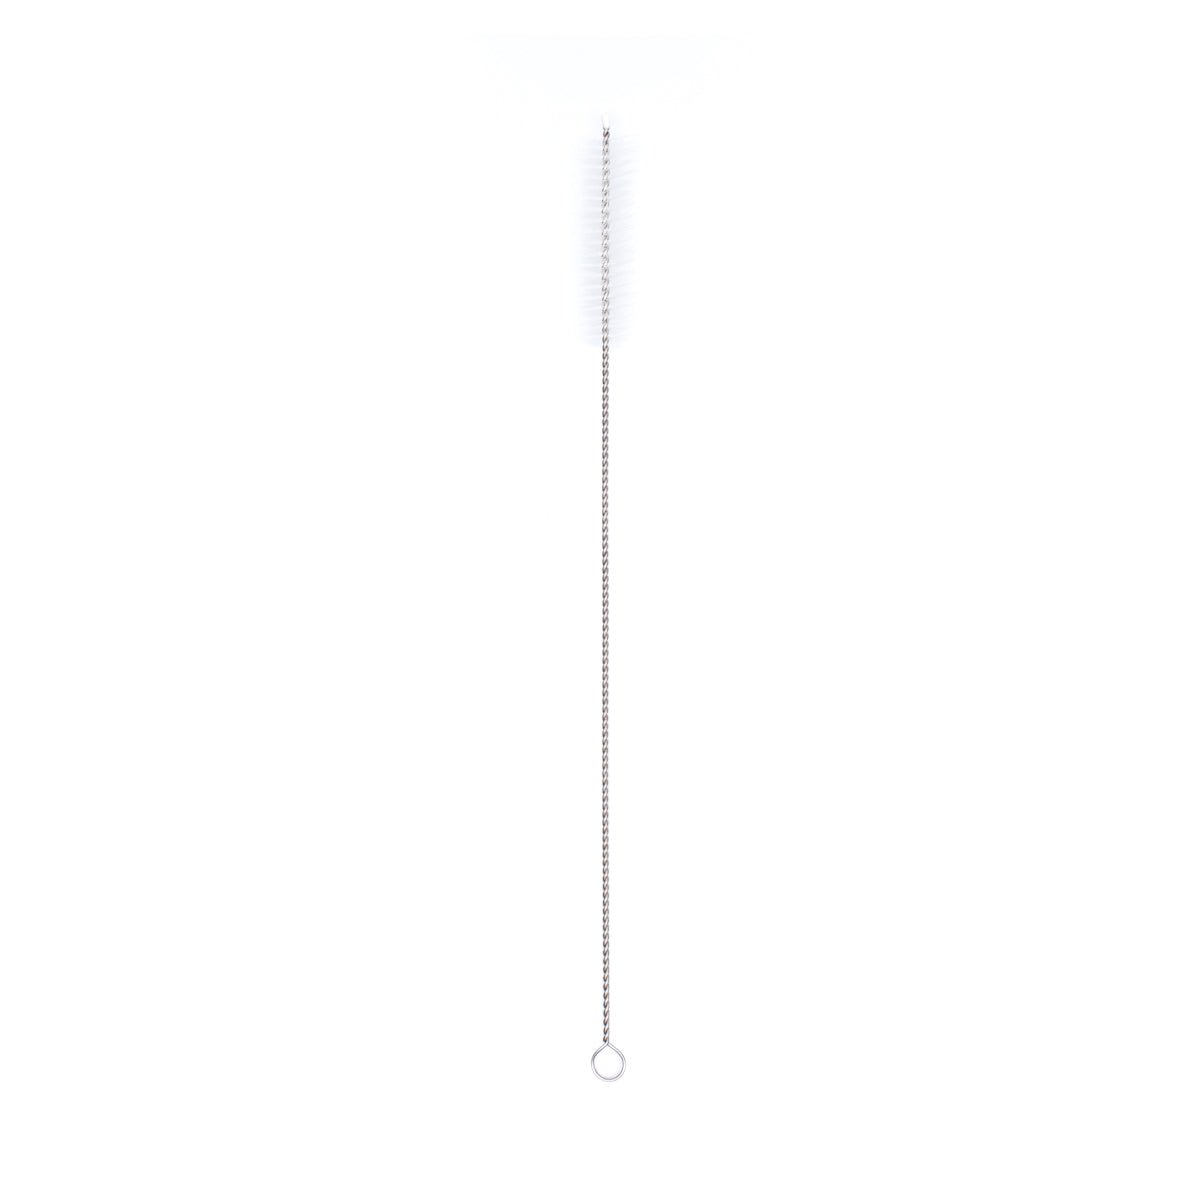 Bubble Tea Straw (Set of 3) - Earth & Blooms